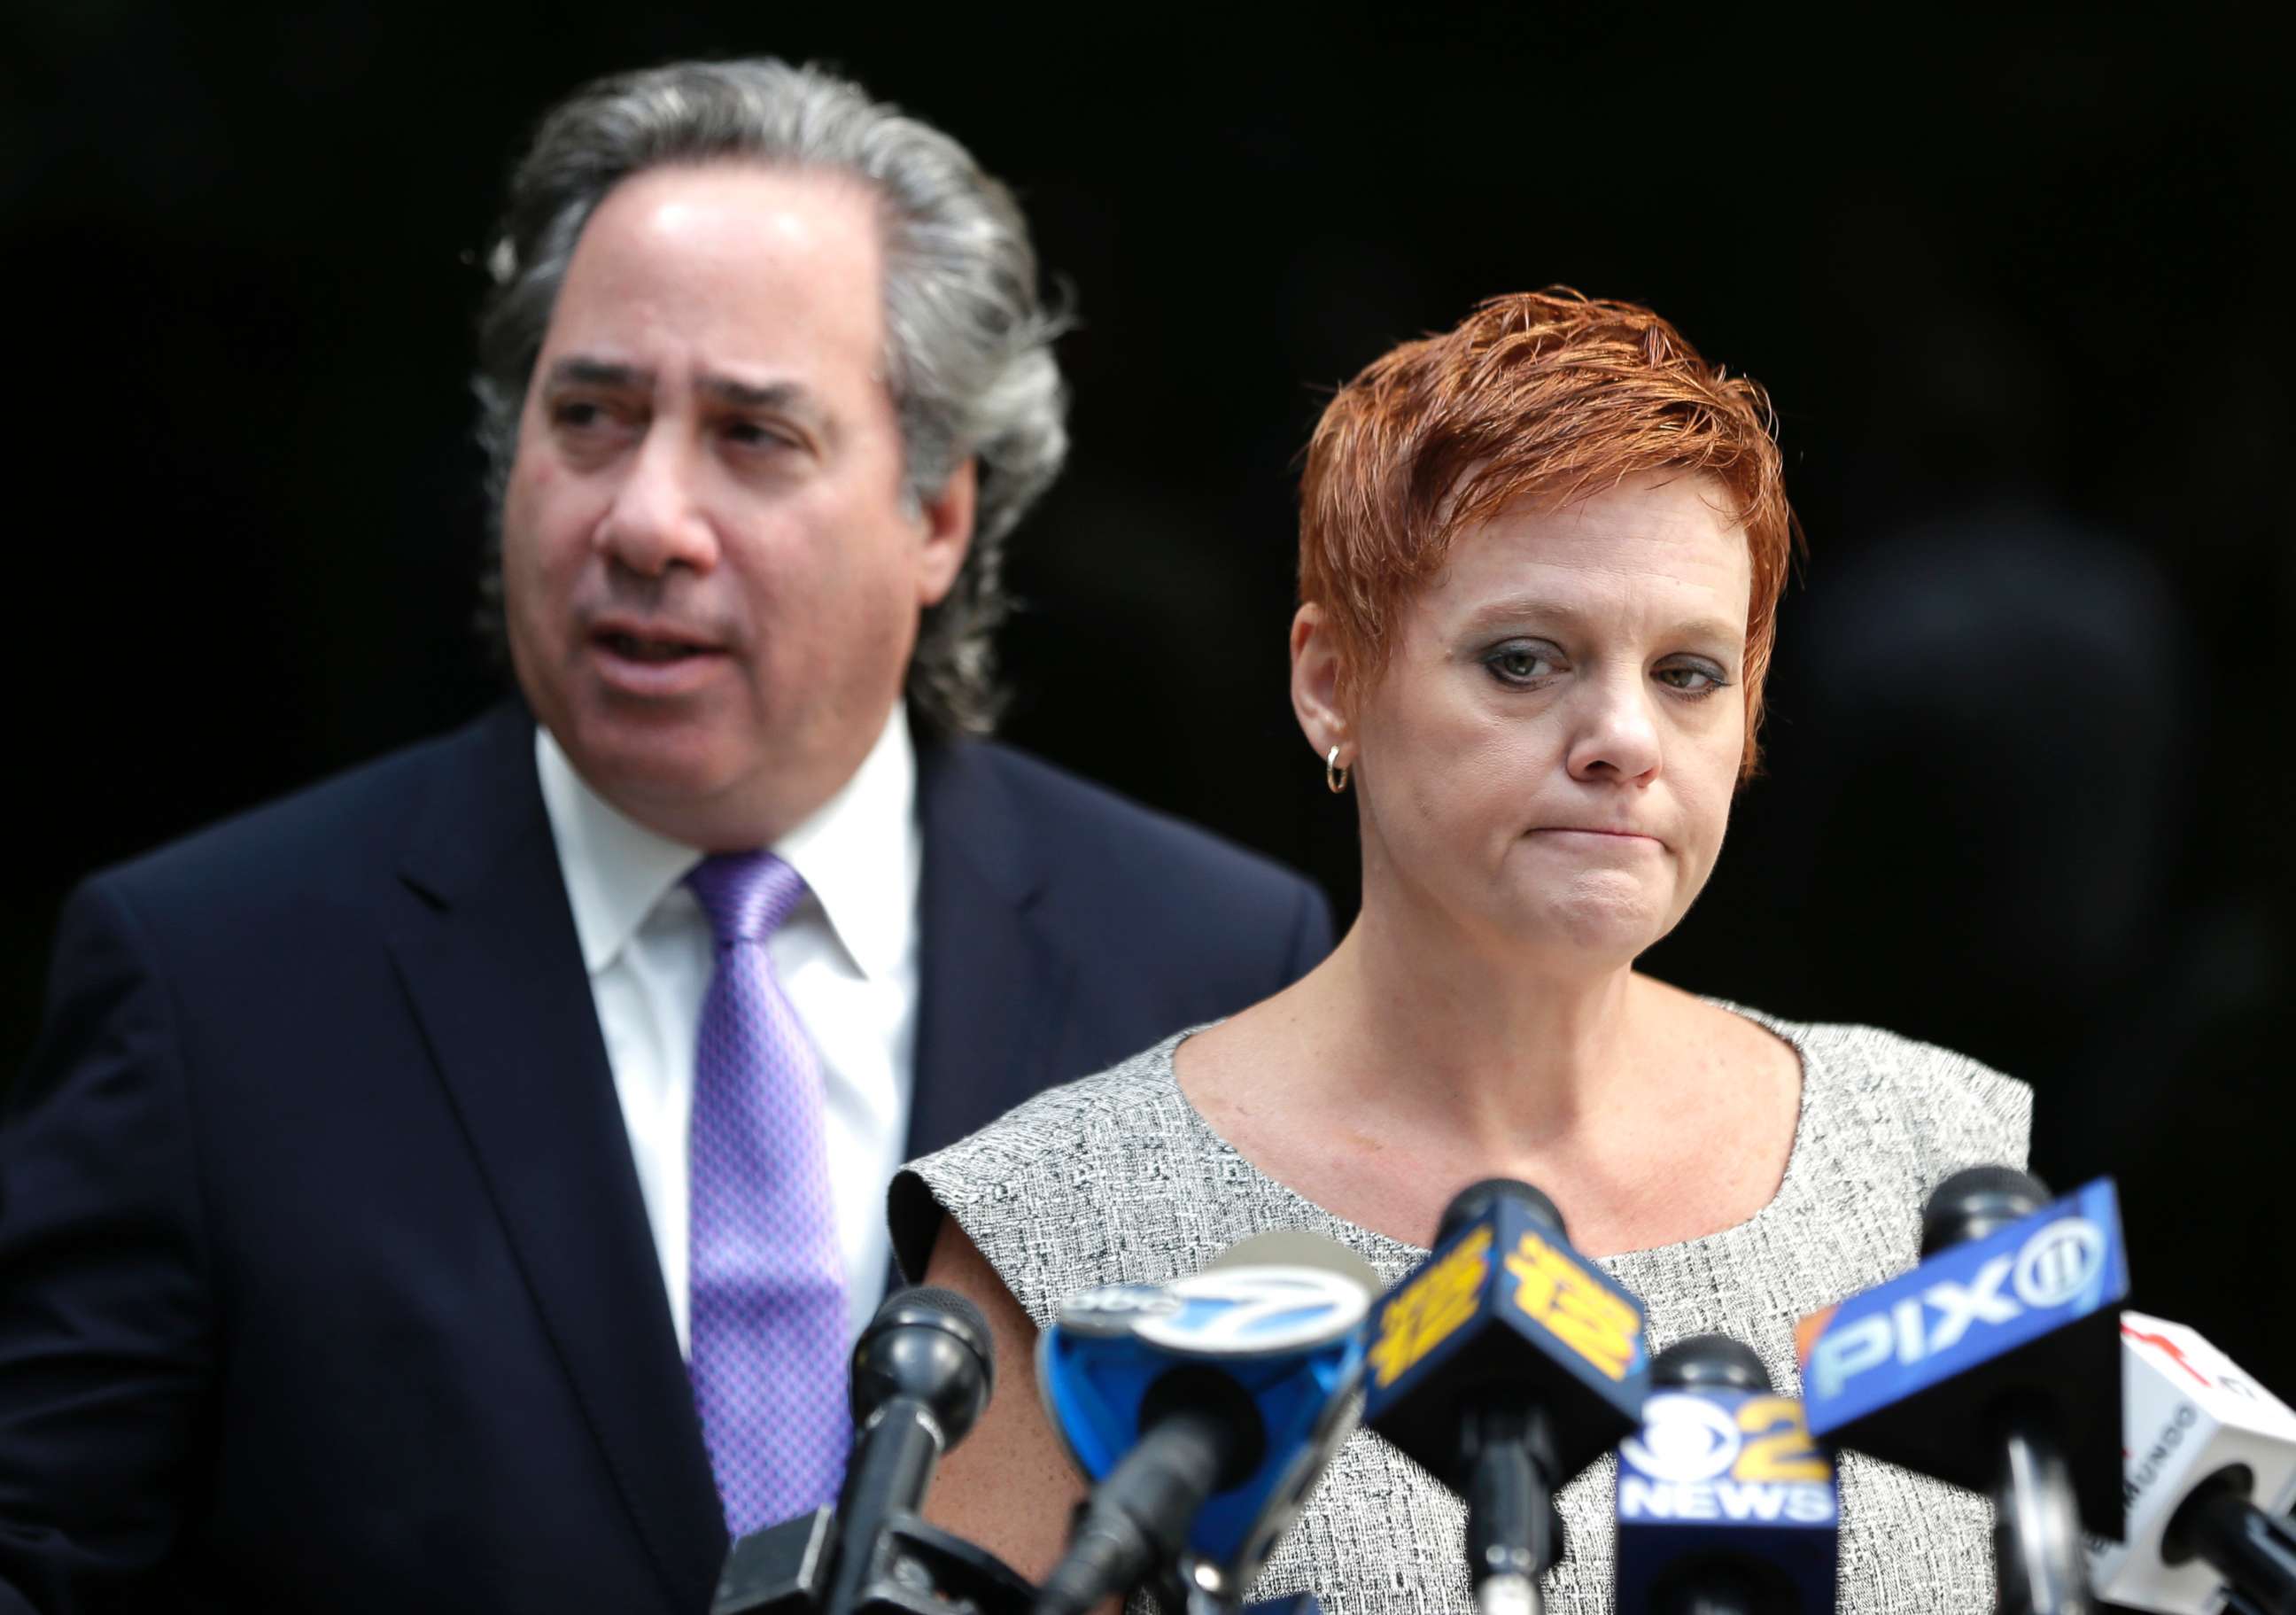 PHOTO: Dianne Grossman, mother of Mallory Grossman, speaks to reporters while her attorney Bruce Nagel looks on during a news conference in Roseland, N.J., Aug. 1, 2017. 